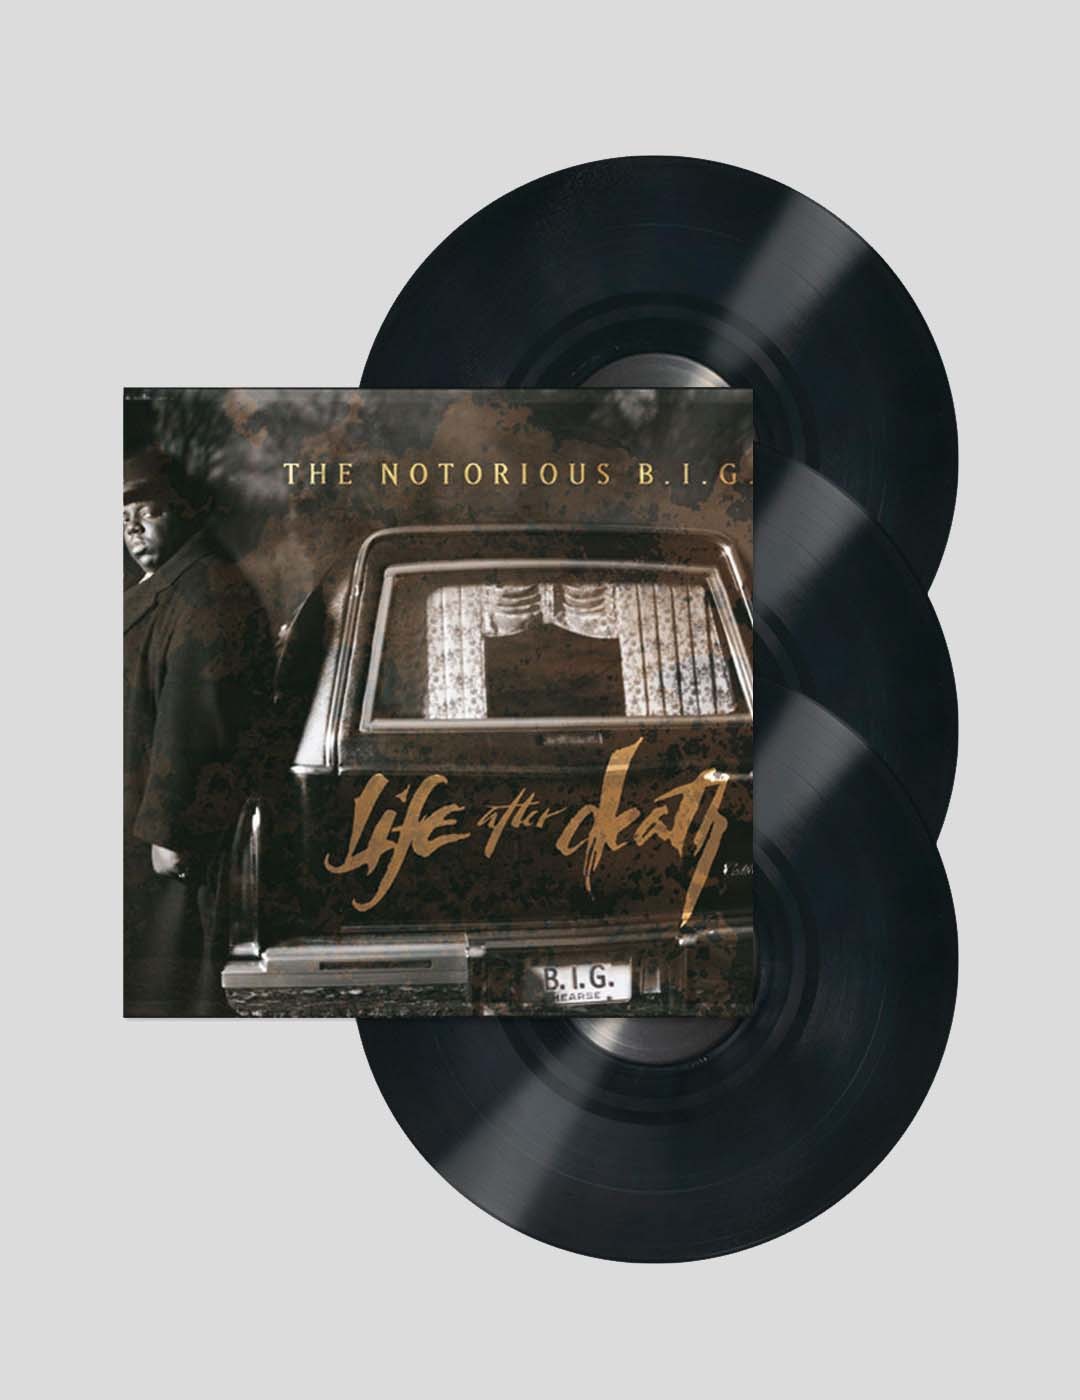 DISCO VINILO NOTORIOUS B.I.G. - LIFE AFTER DEATH 3LPS